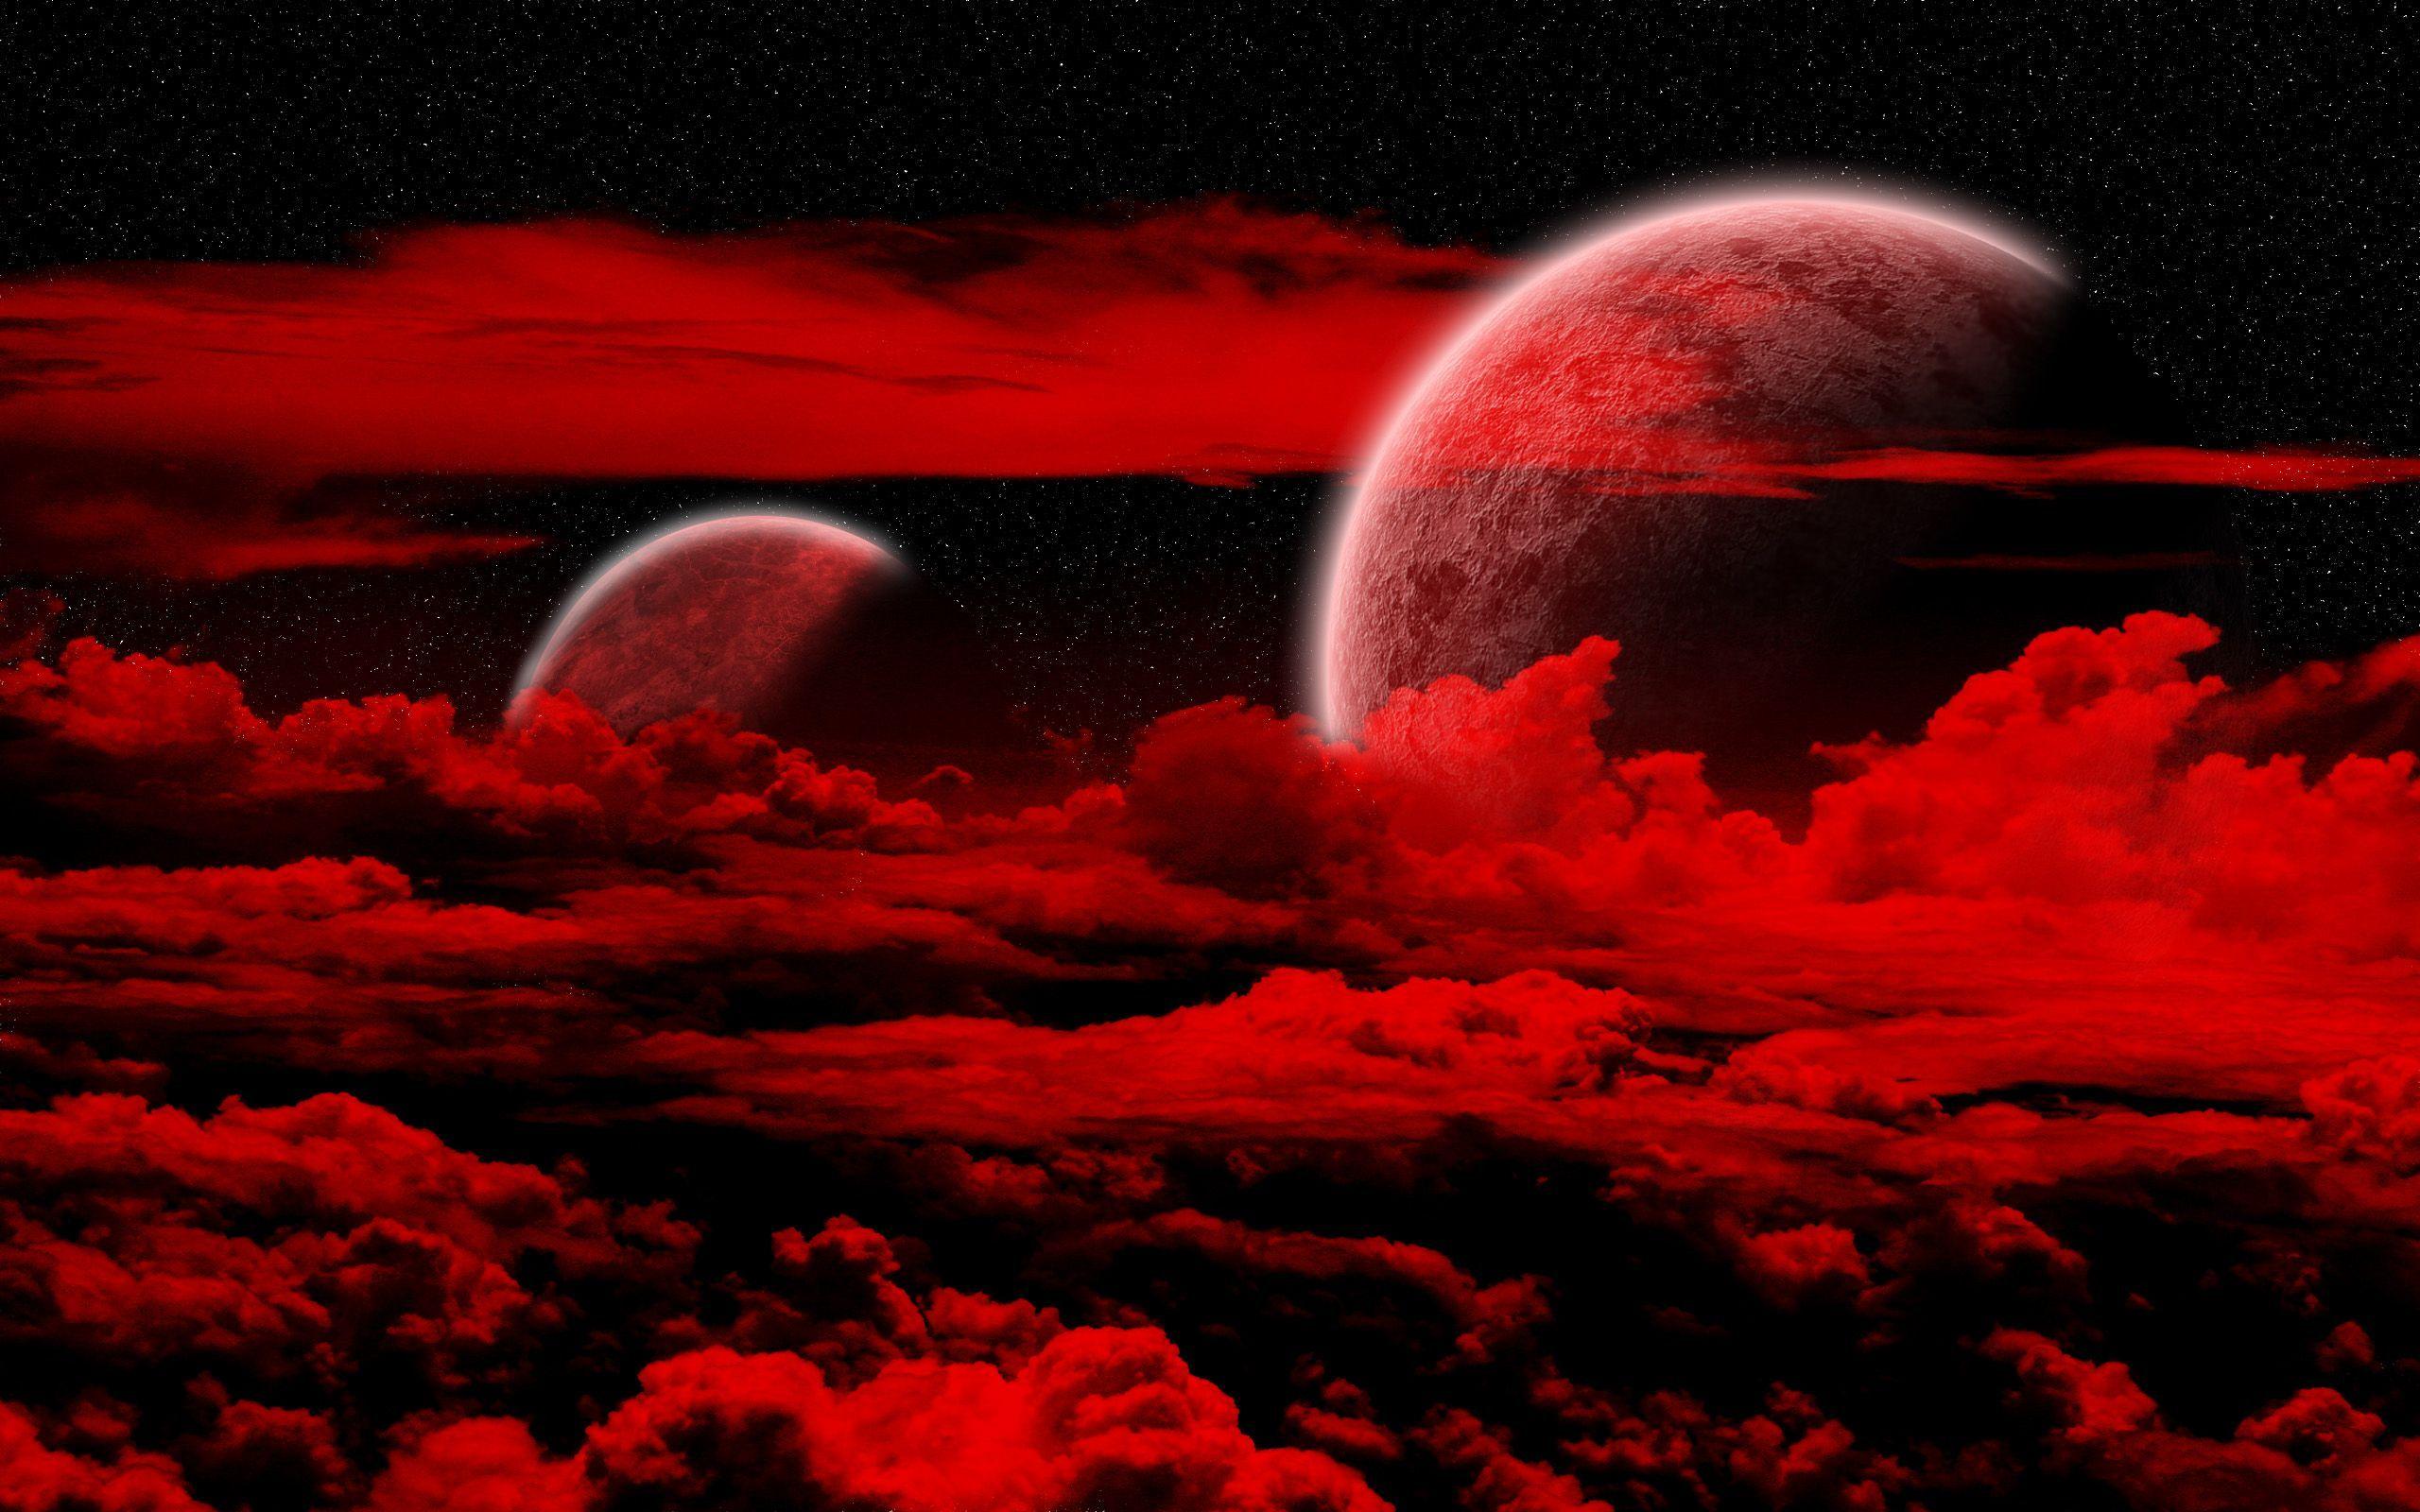 Black and Red Space Wallpapers - Top Free Black and Red Space